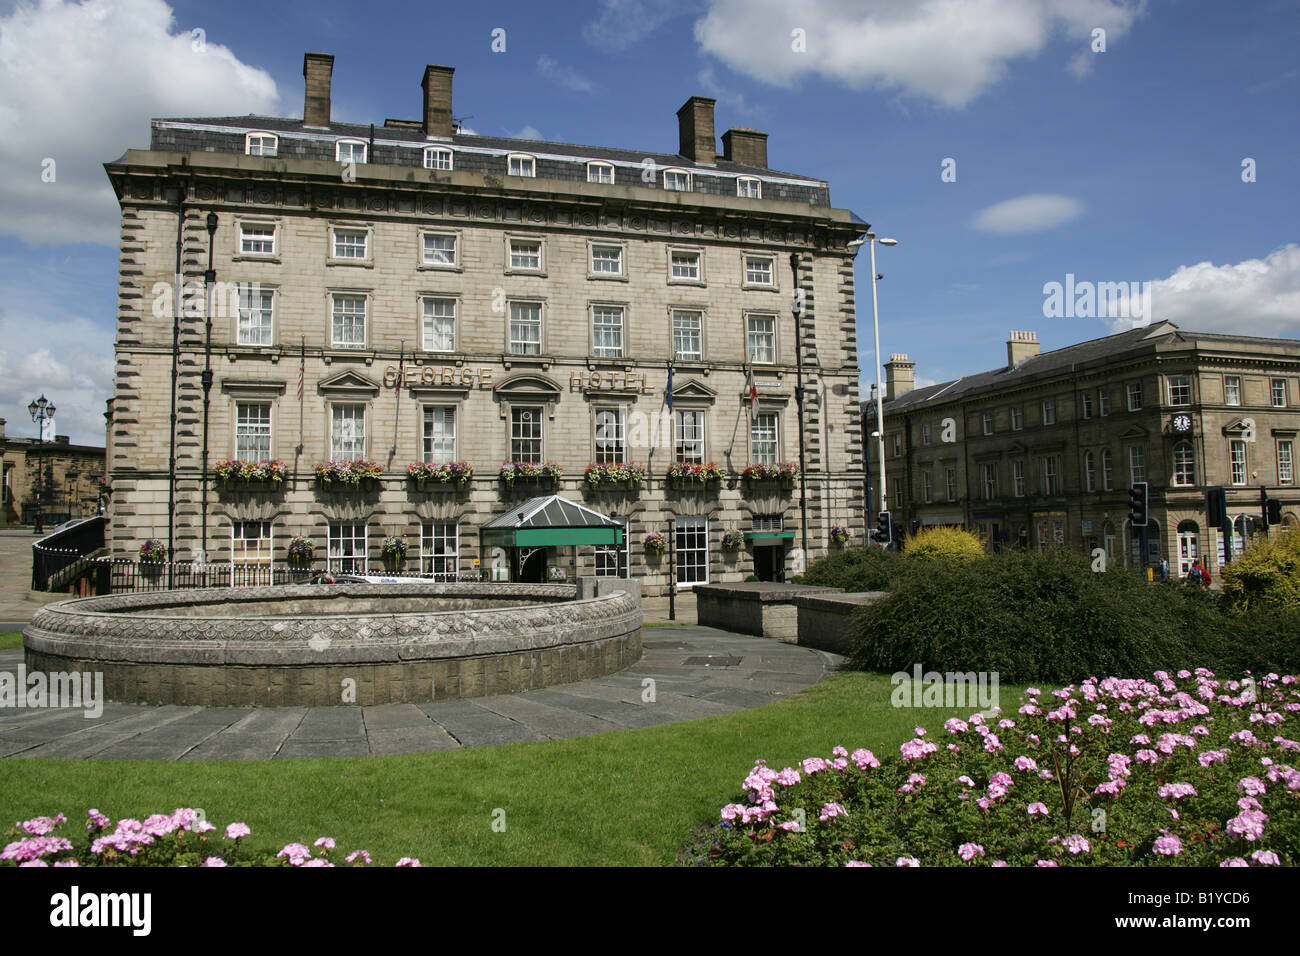 Town of Huddersfield, England. The Grade II listed Victorian style George Hotel at Saint George’s Square and Railway Street. Stock Photo